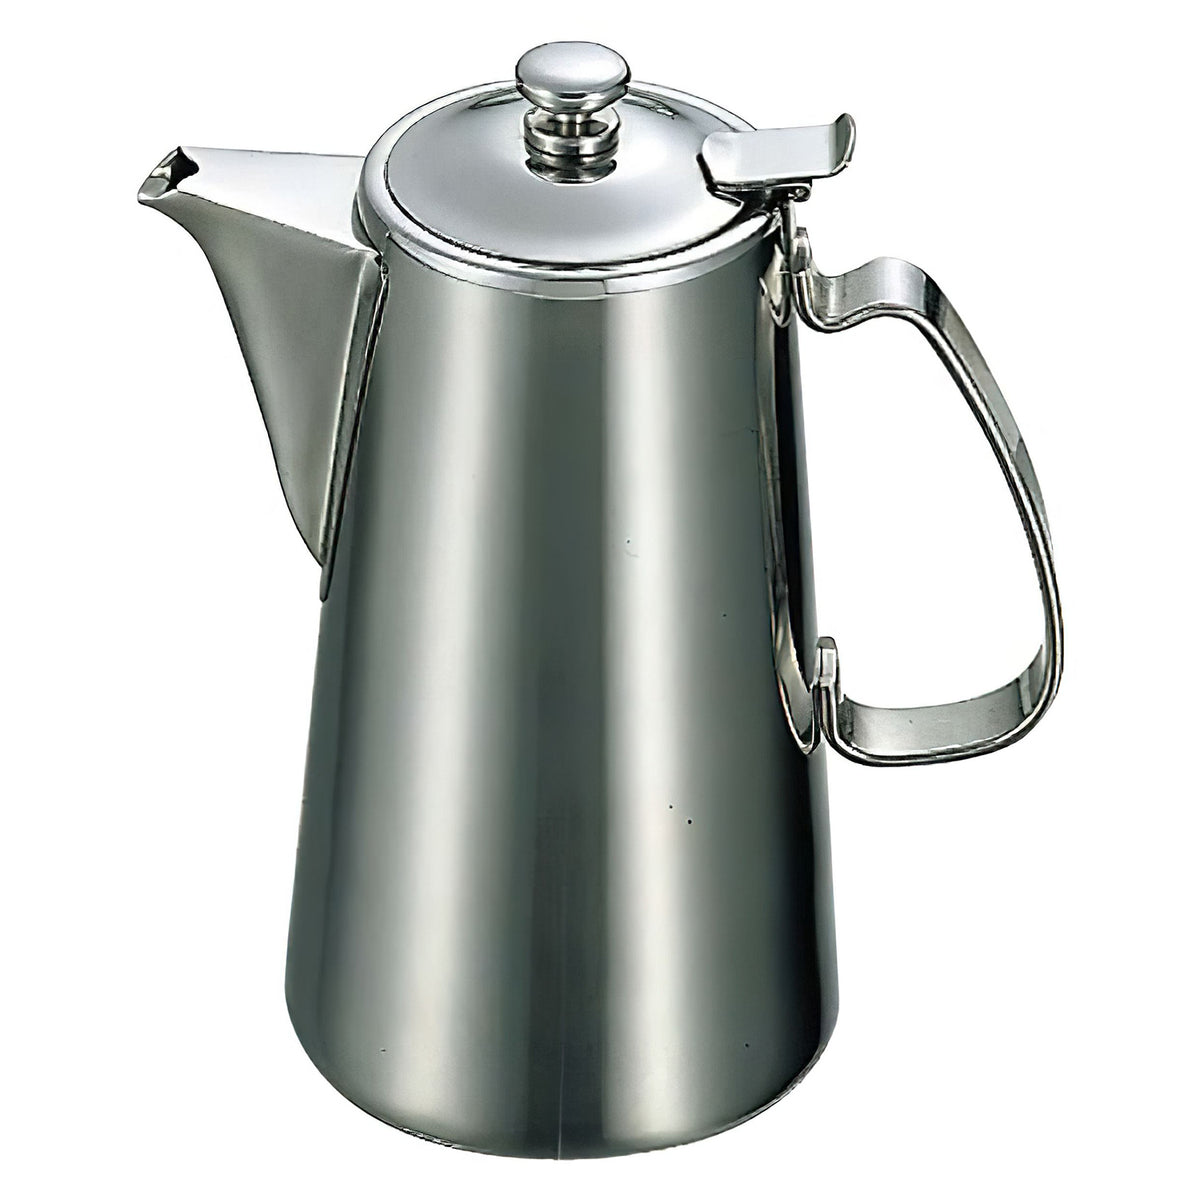 Sampo Sangyo Stainless Steel Water Pitcher 1.9L